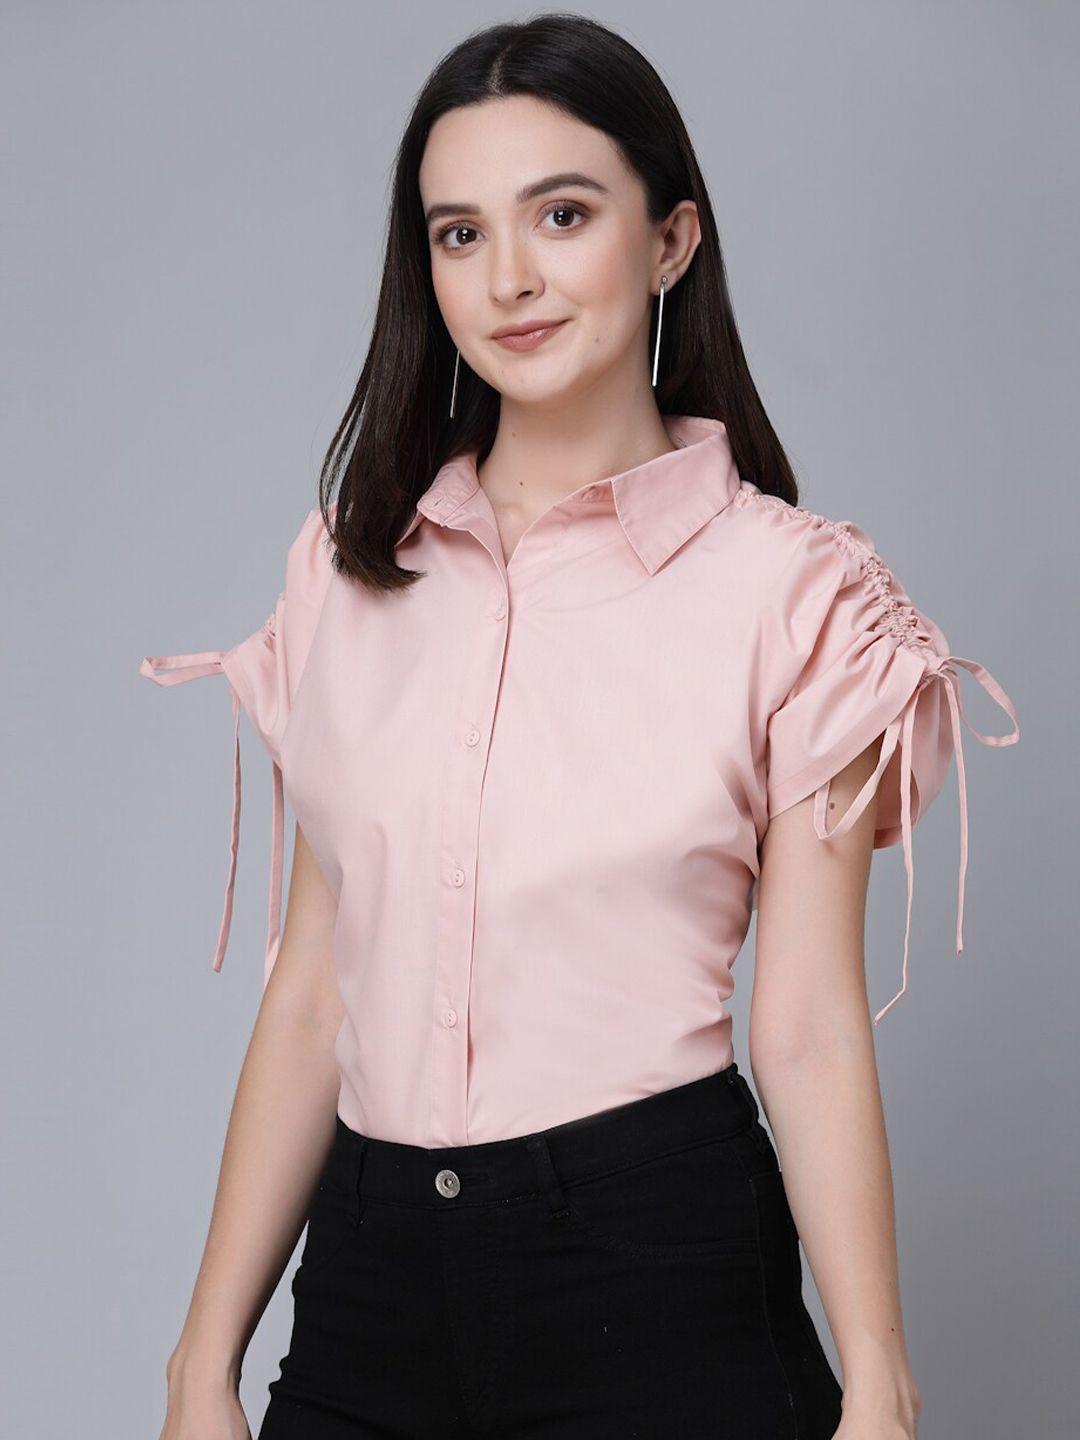 Style Quotient Nude Shirt Collar Shirt Style Top